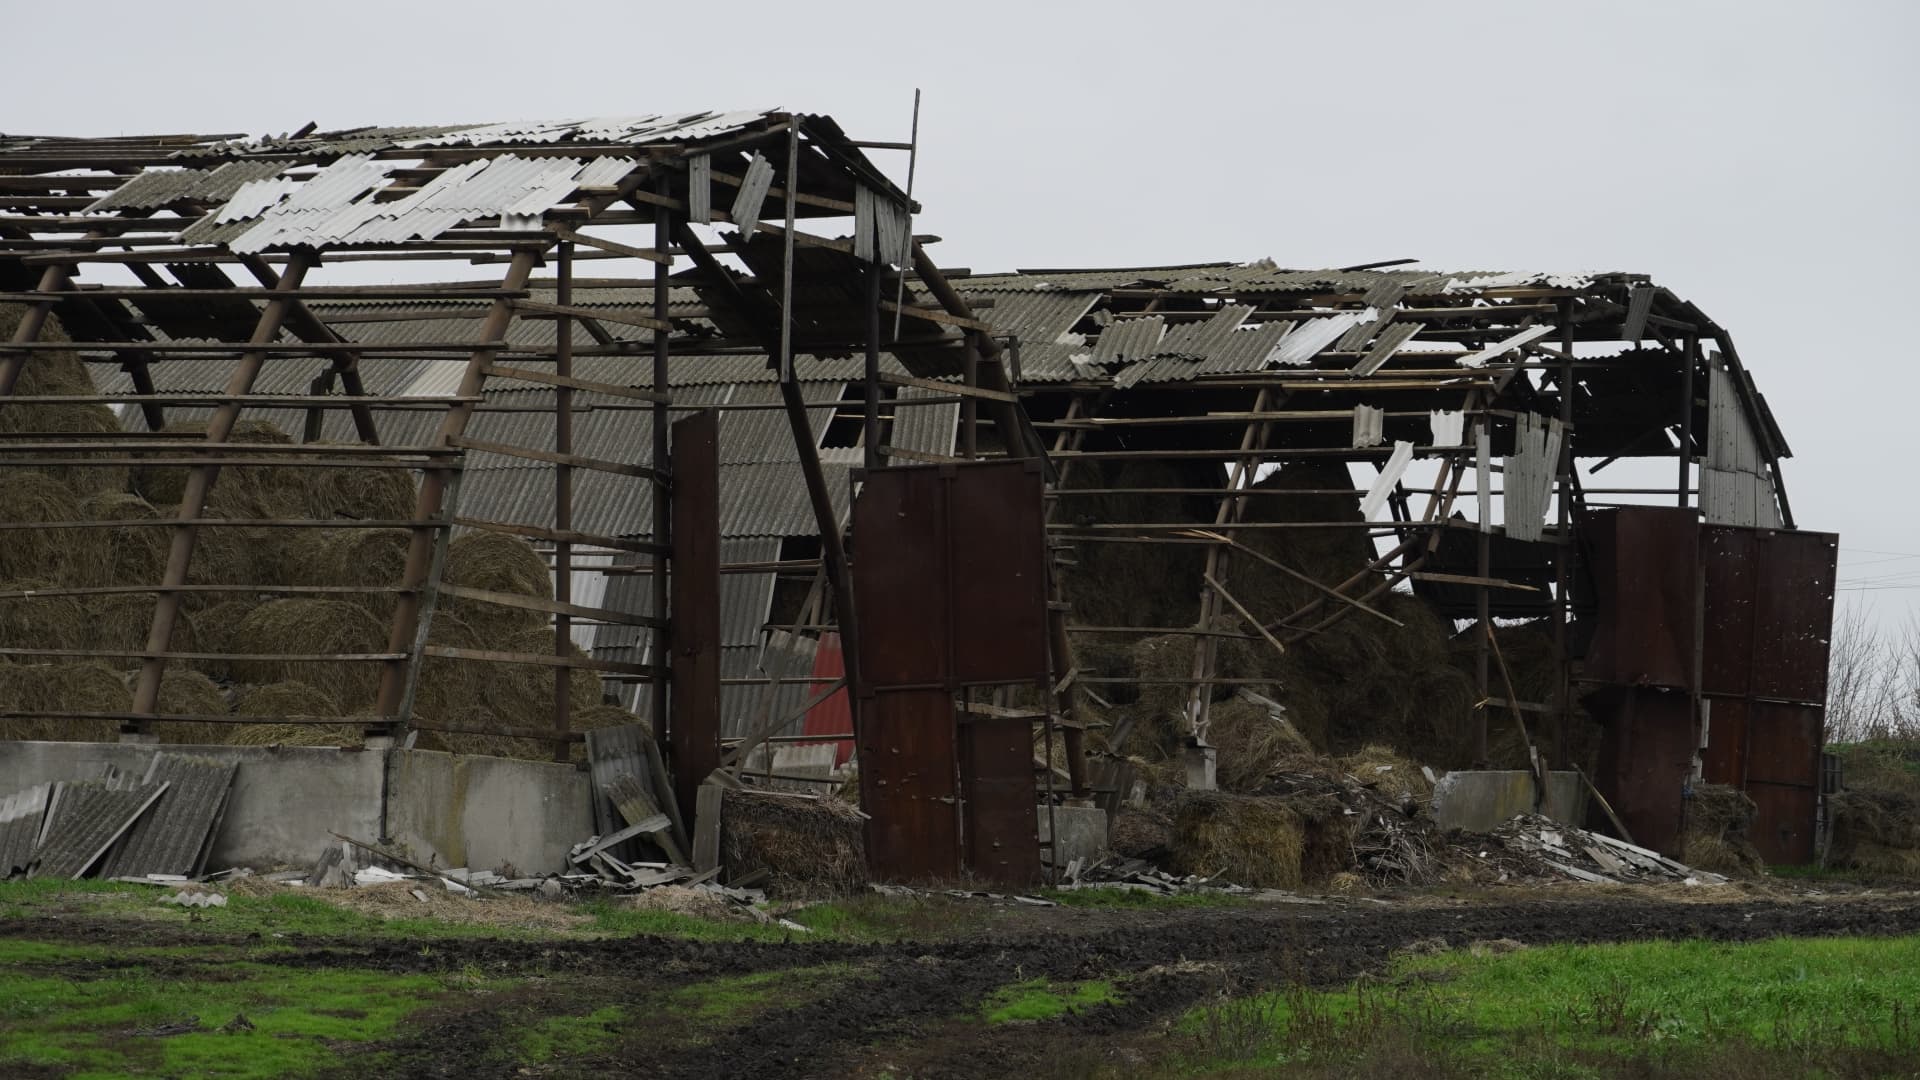 A view of damaged structures in Belgorod in Russia after suspected attacks, seen on Nov. 6, 2022.